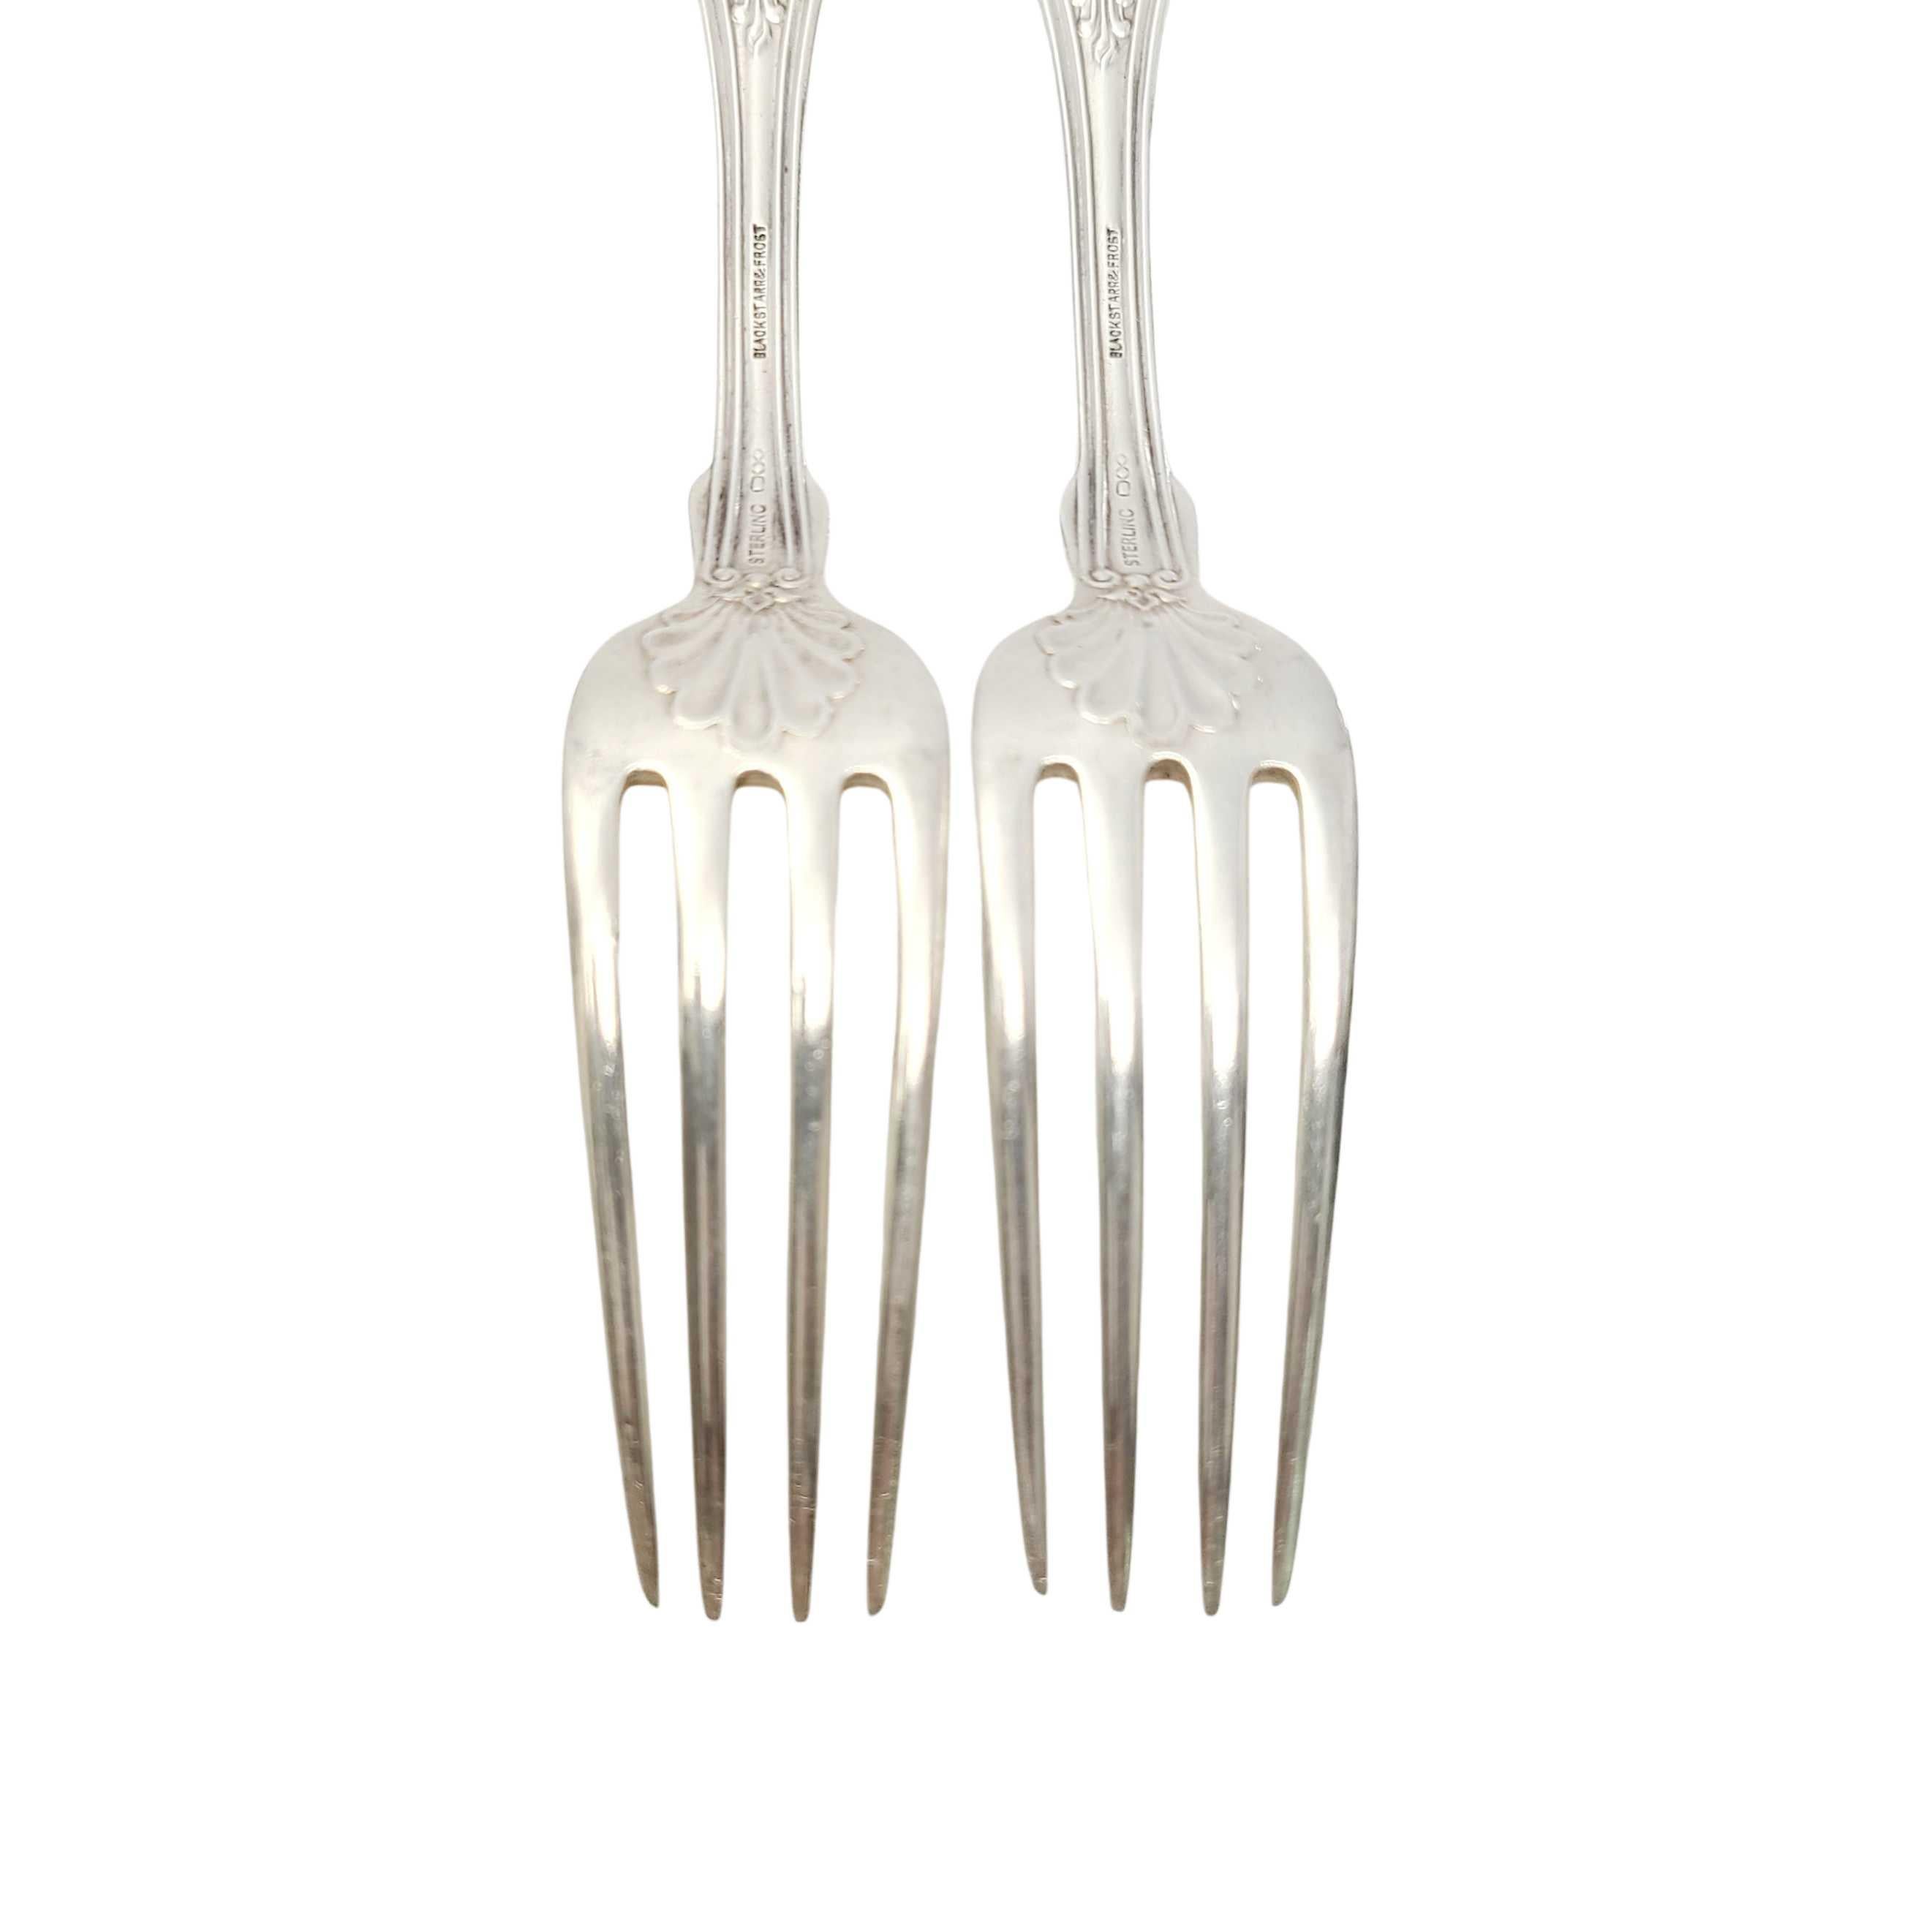 Set of 2 Dominick & Haff Sterling Silver King Forks with Monogram 2